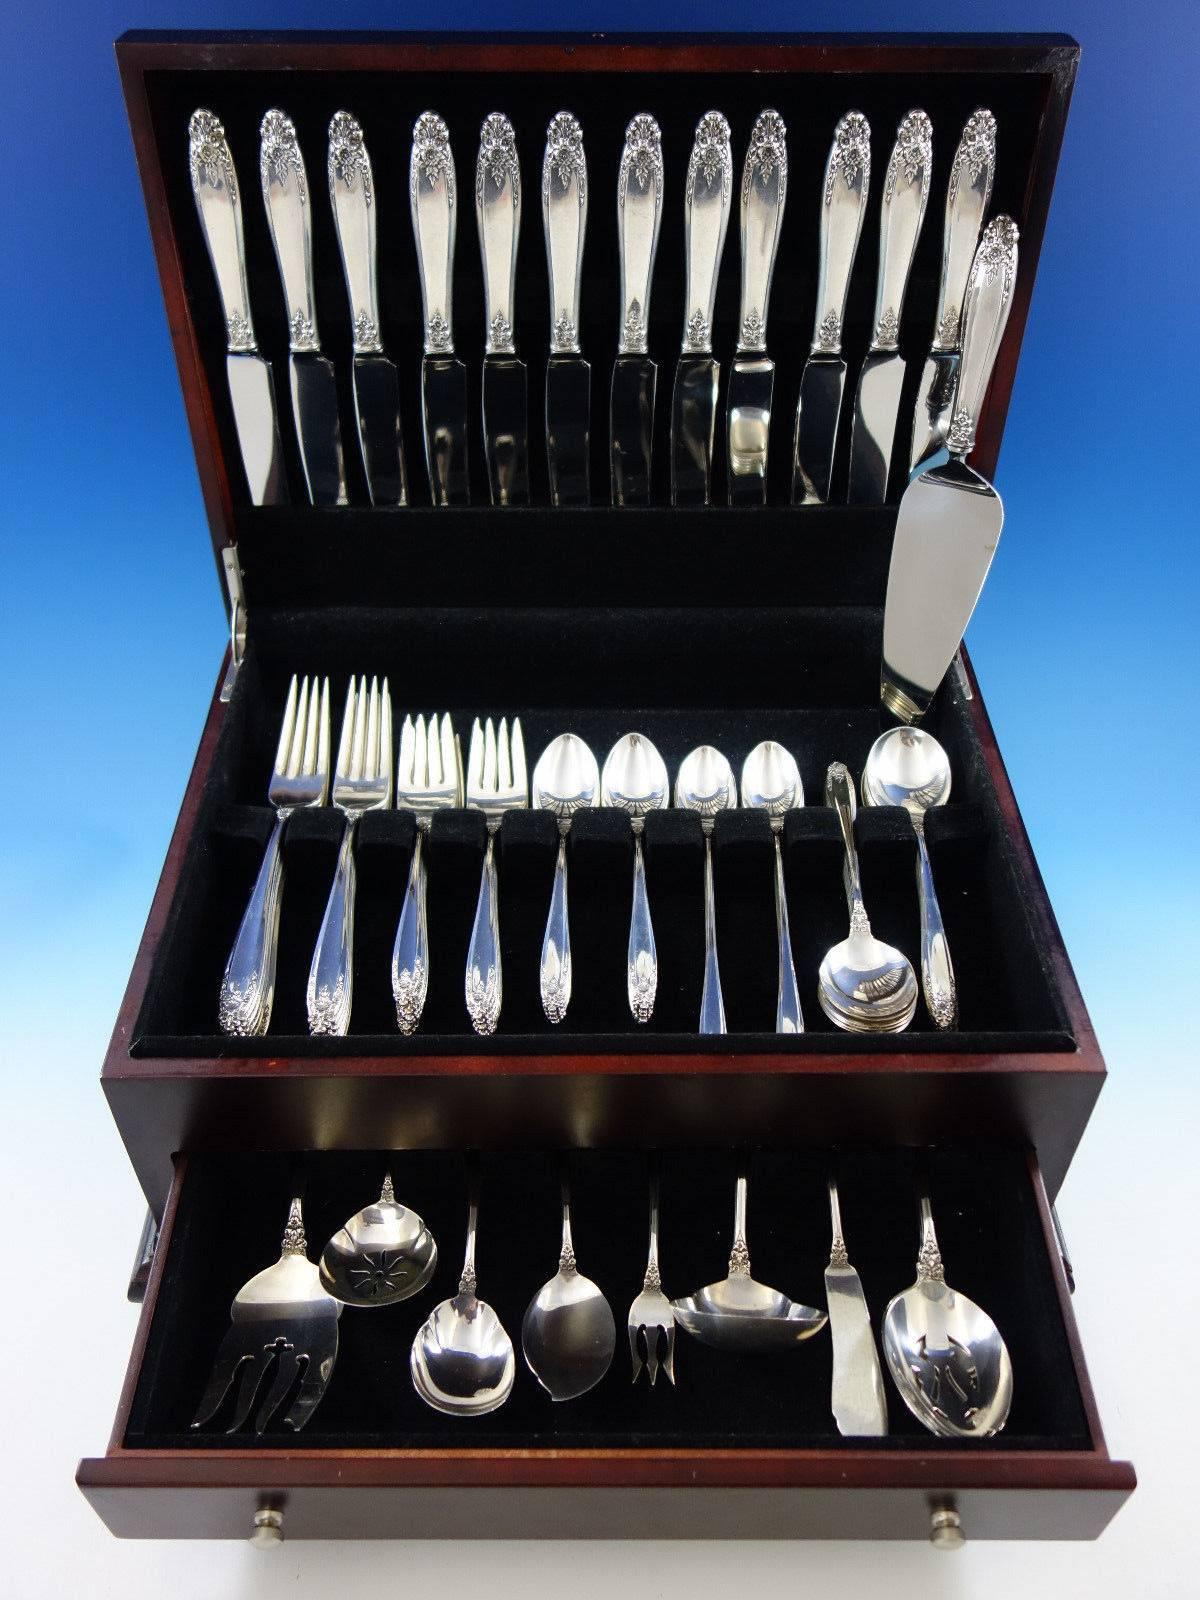 Dinner size prelude by International Sterling silver flatware set, 82 pieces. This set includes: 

12 dinner size knives, 9 5/8